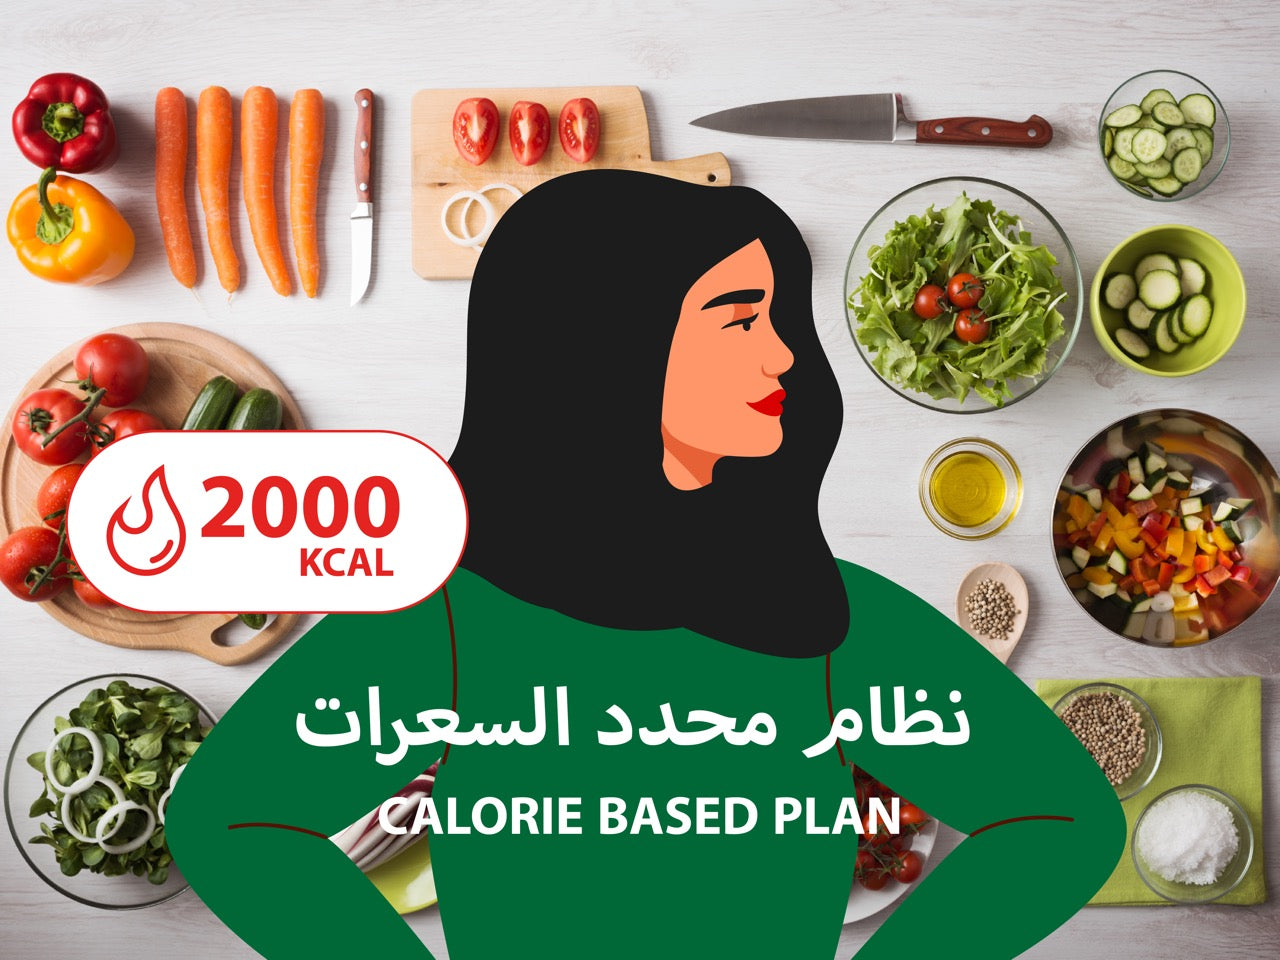 Calorie Based Plan for Females (2000+ Kcal)